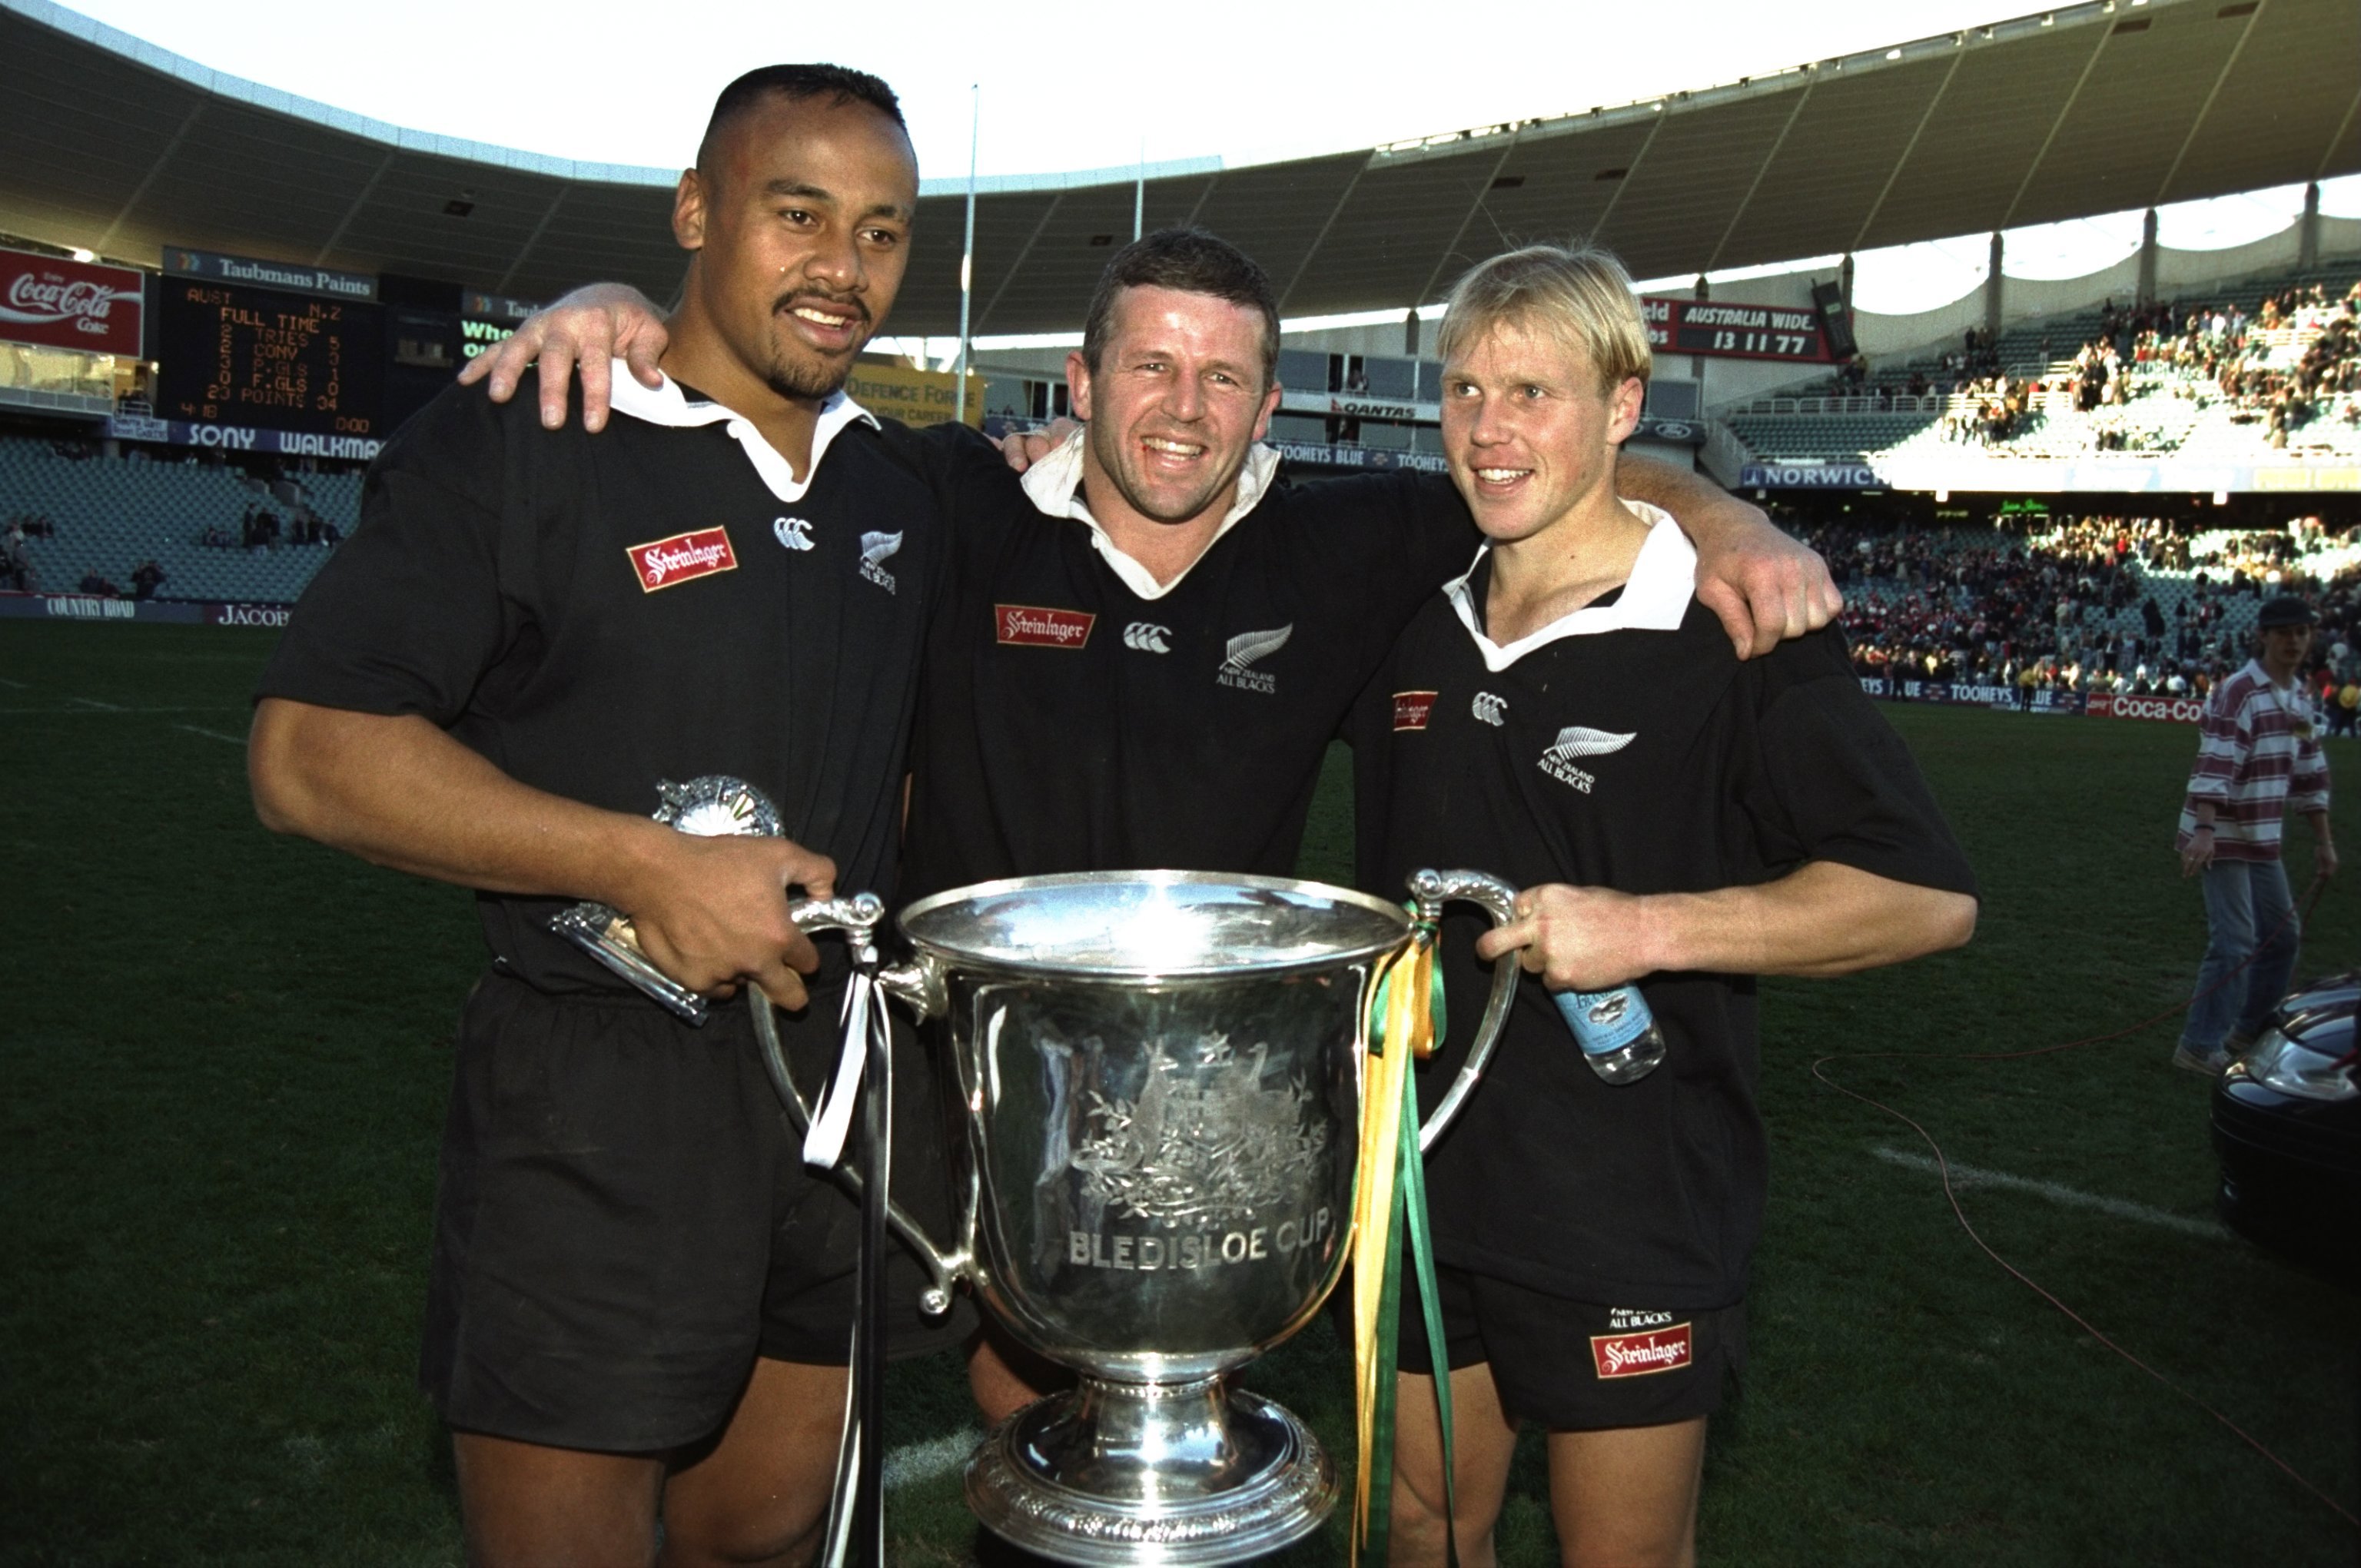 Jonah Lomu (left), Sean Fitzpatrick (centre) and Jeff Wilson (right) of New Zealand hold the Bledisloe Cup after winning the final against Australia in Sydney.